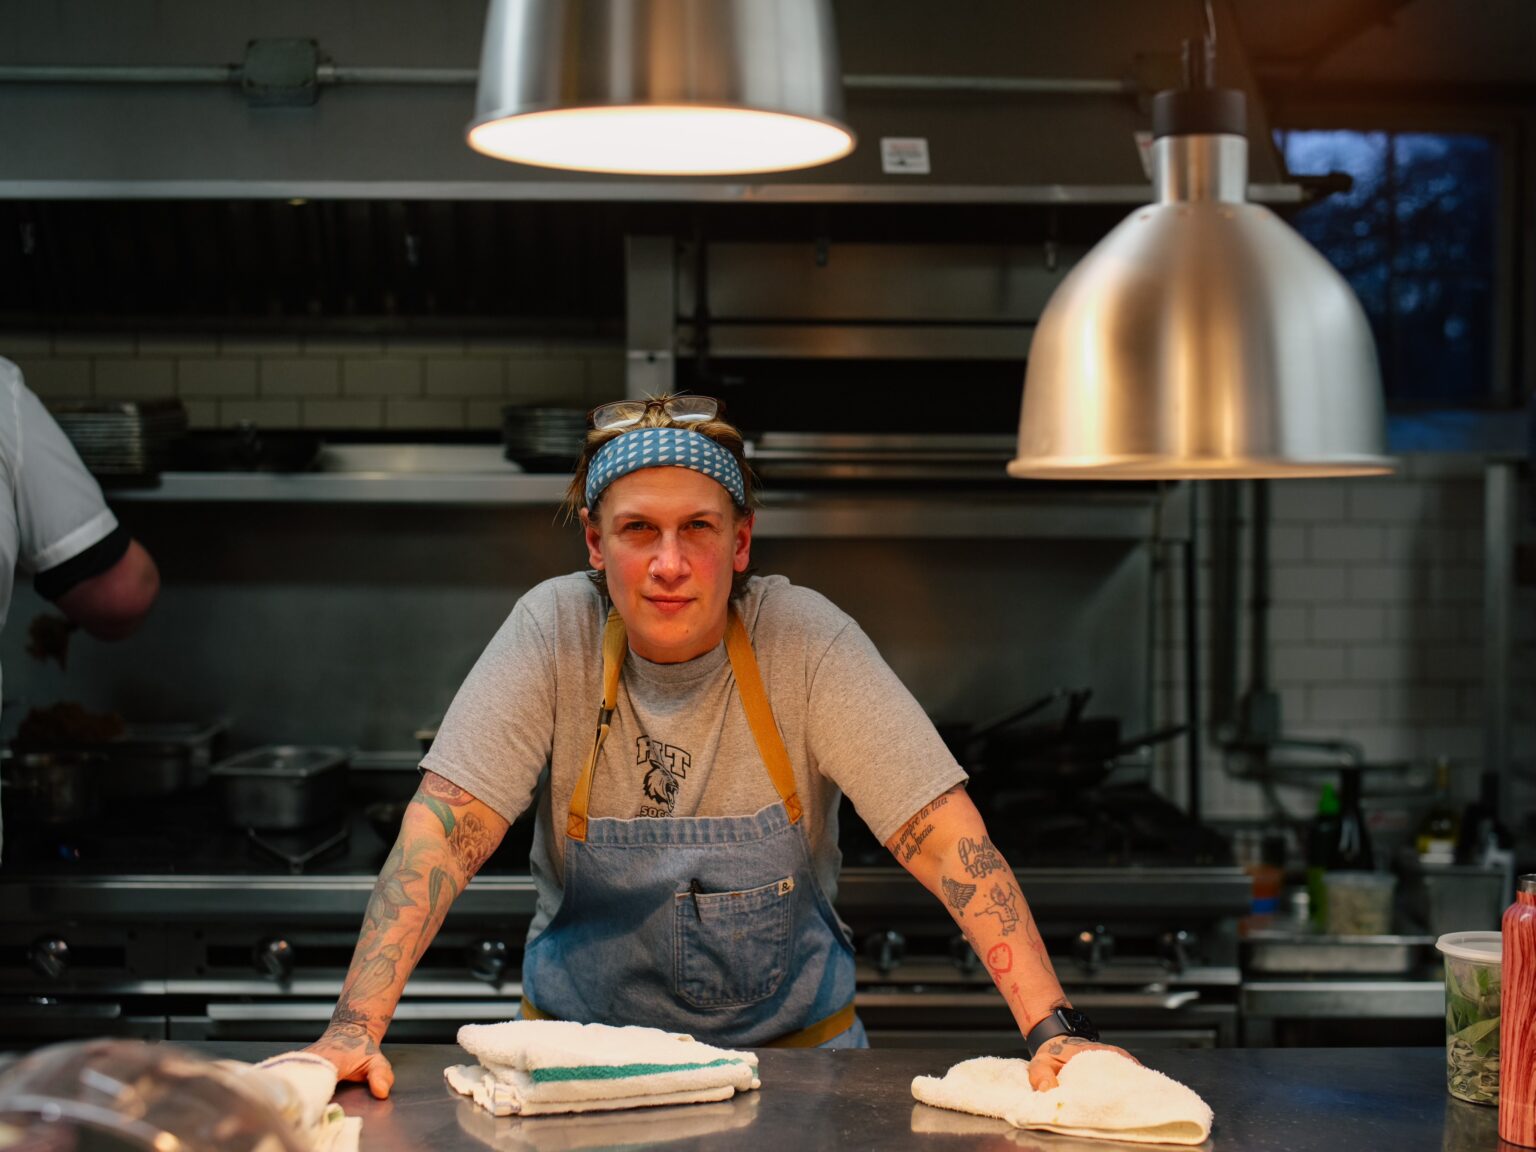 Chef Michele Ragussis, the Head Chef at Gedney Farm since last February, stands confidently in a professional kitchen. She leans on a stainless steel counter with folded kitchen towels in front of her. Wearing a gray t-shirt, a blue apron, and a blue and white bandana, she has tattoos visible on her forearms. Industrial pendant lights hang above, illuminating the space, which features stainless steel appliances and a tiled backsplash. Chef Ragussis gazes directly at the camera with a determined expression.